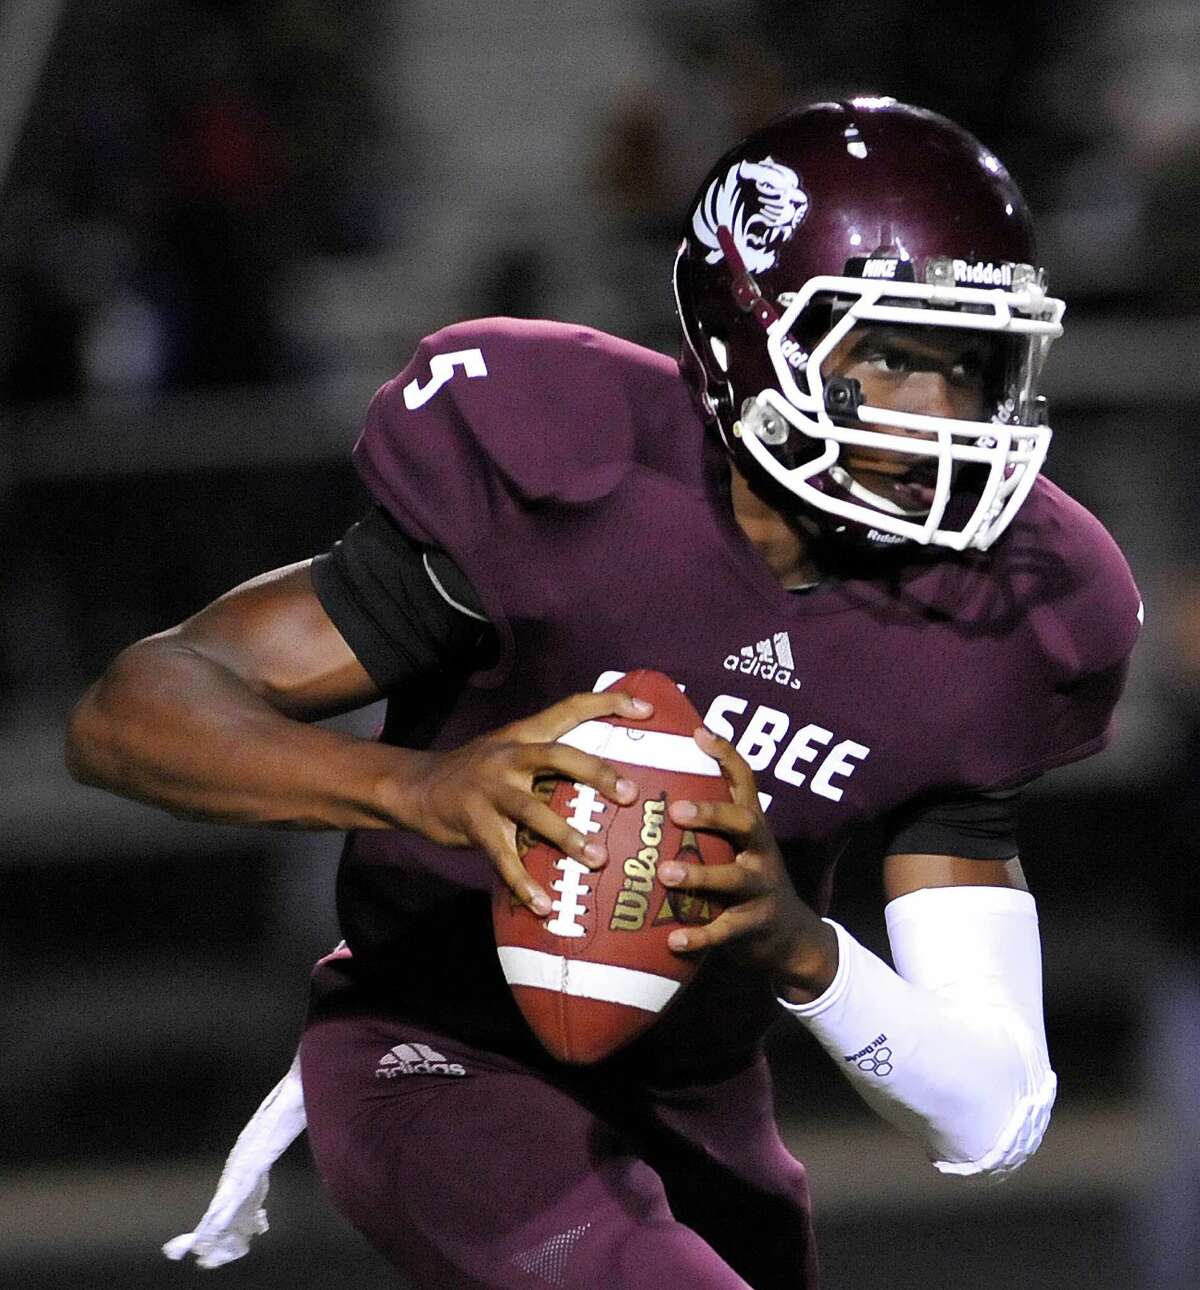 Silsbee football players deciding on college offers